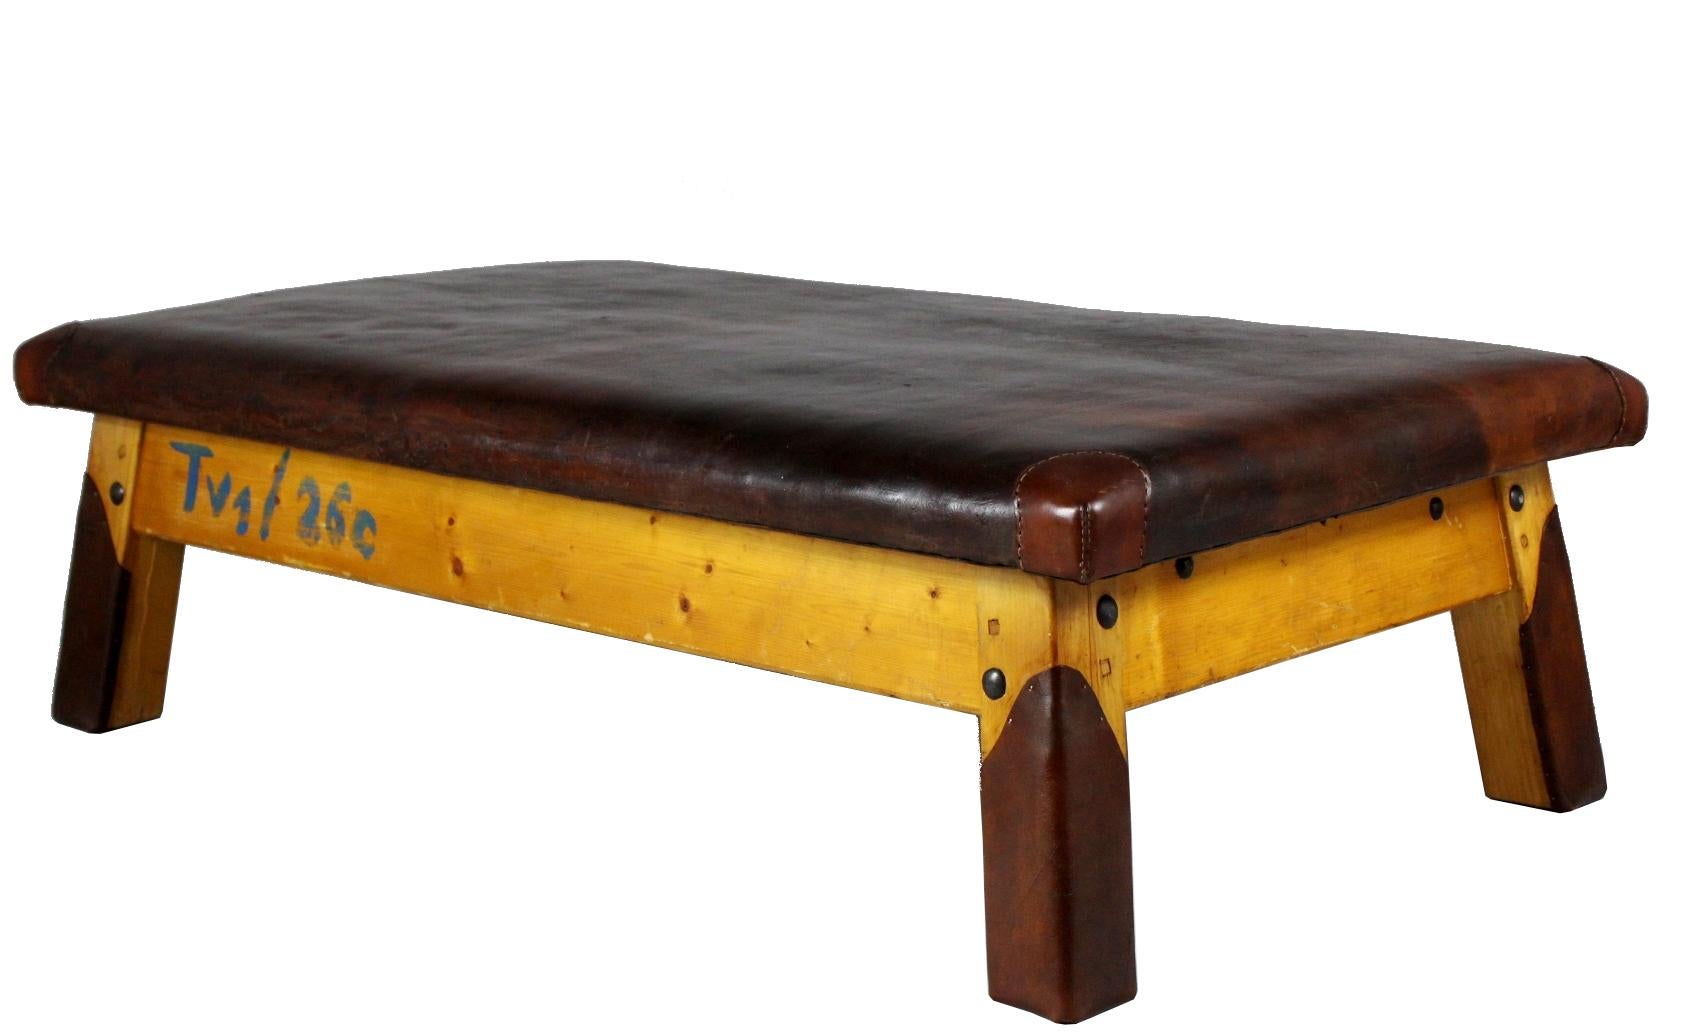 1930s Large Leather Gym Table/Daybed (20. Jahrhundert)